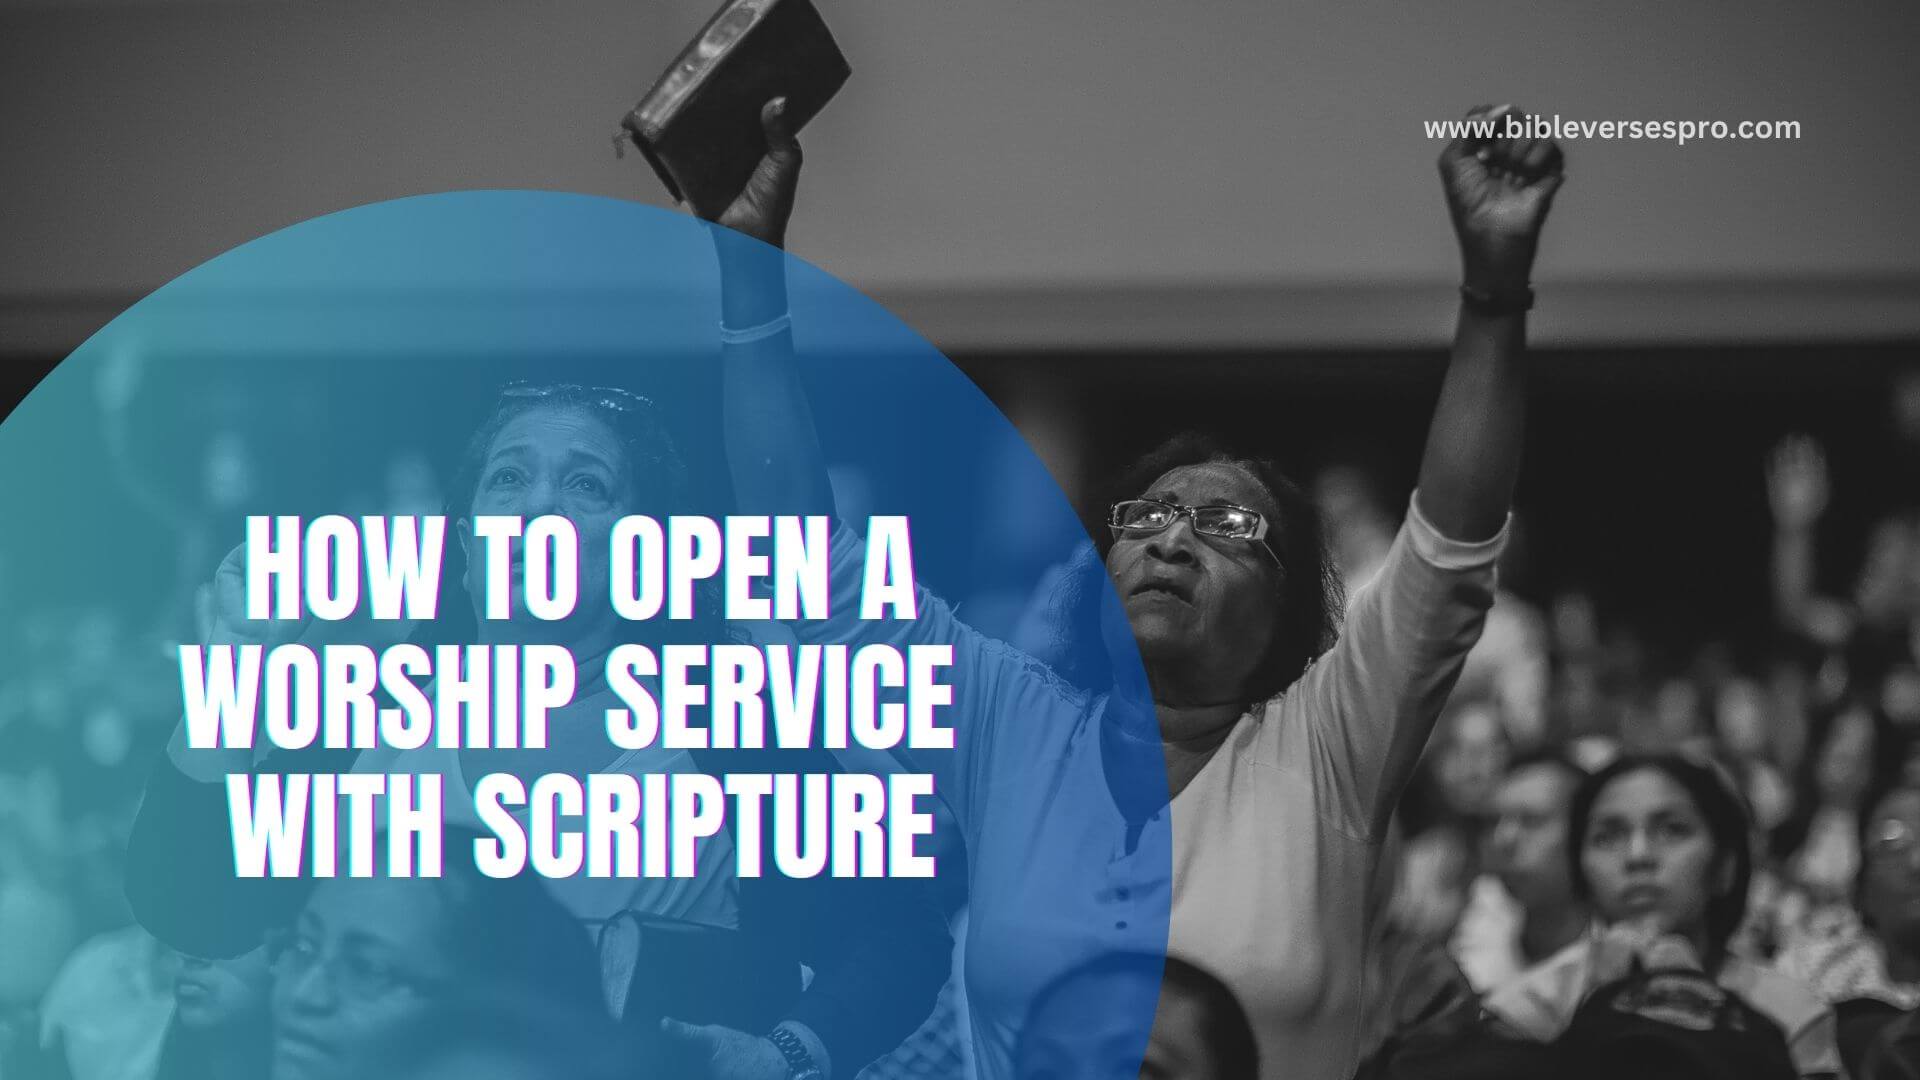 How To Open A Worship Service With Scripture (1)